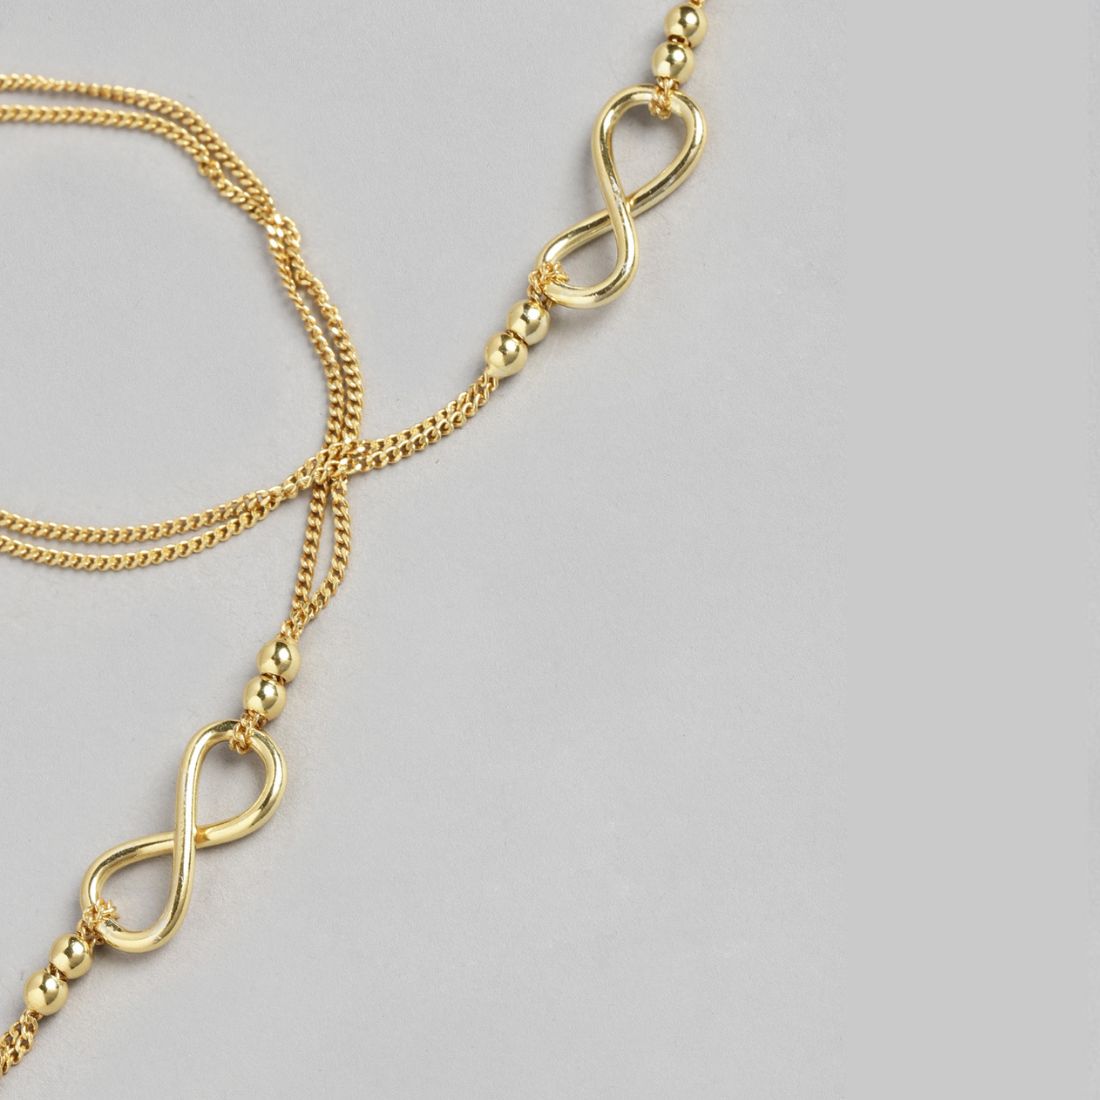 Gilded Infinity Duo 925 Sterling Silver Gold-Plated Chain Anklet